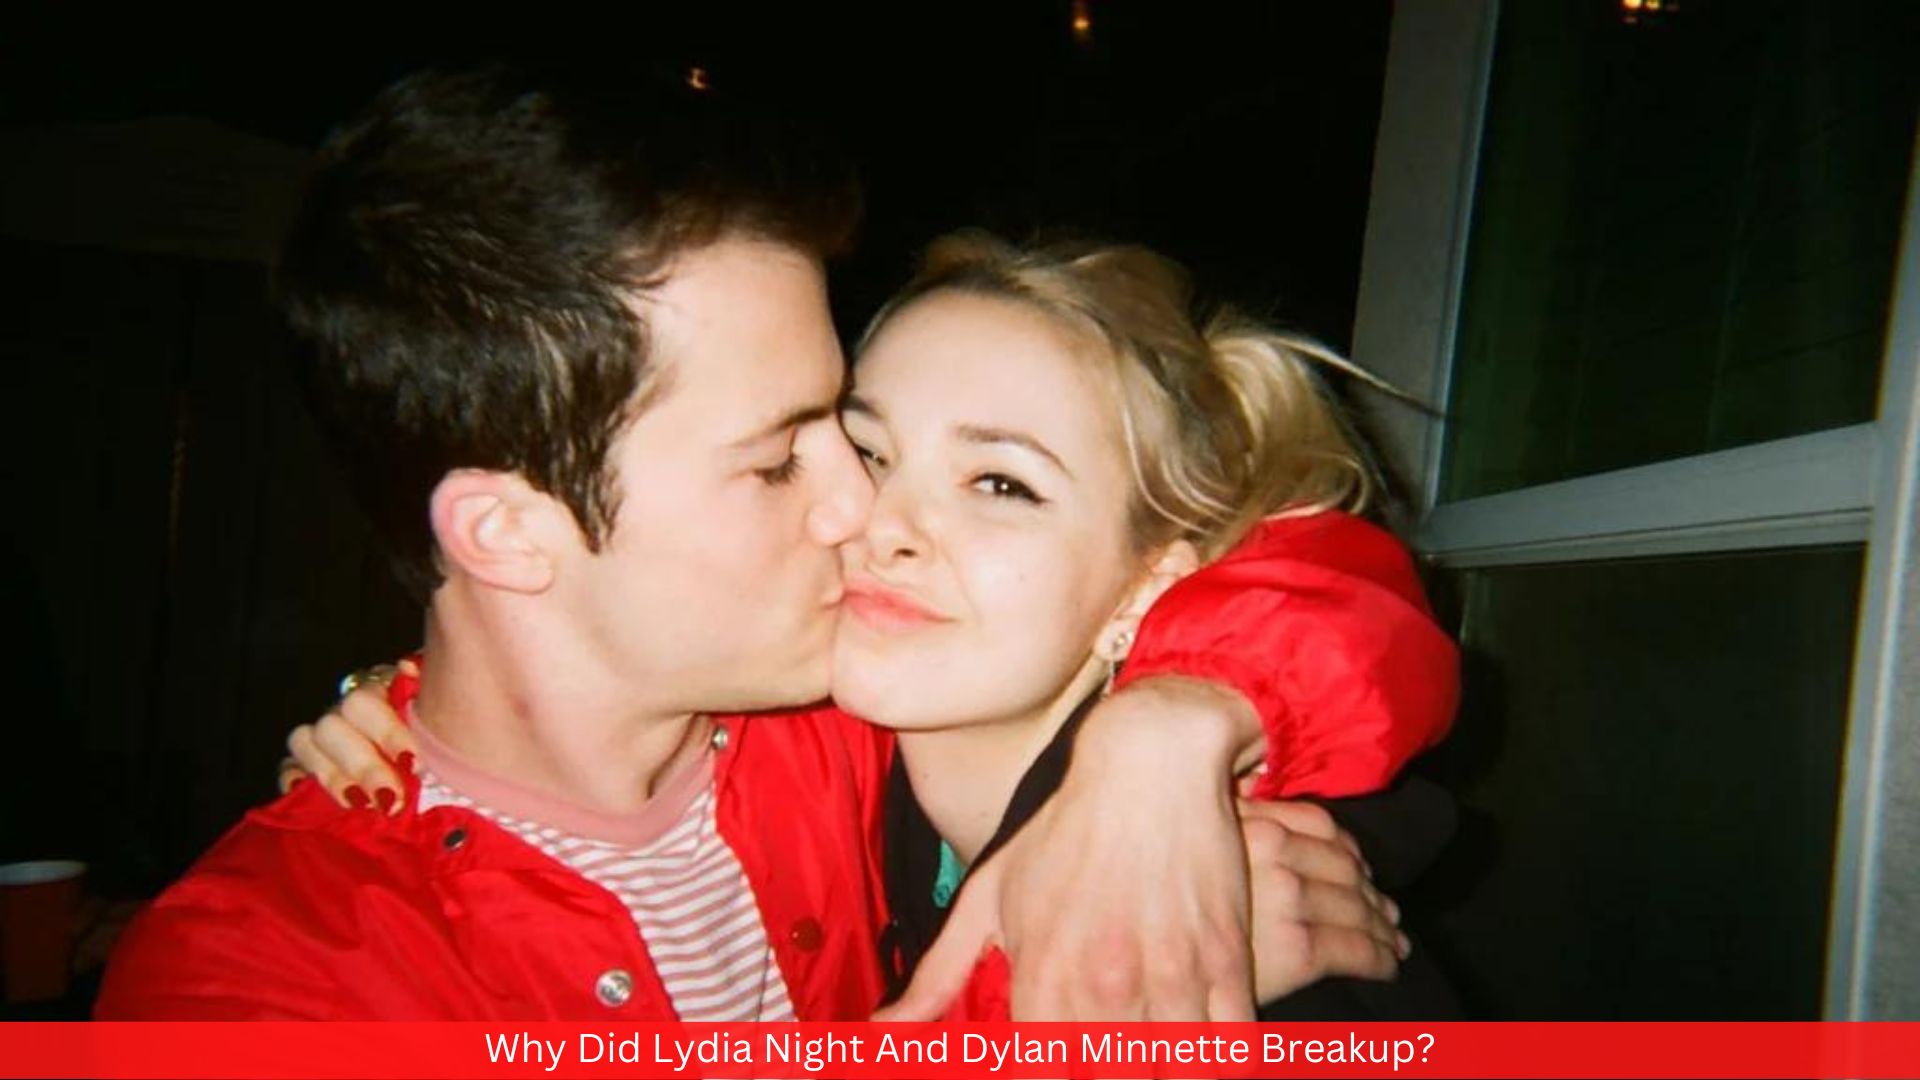 Why Did Lydia Night And Dylan Minnette Breakup?